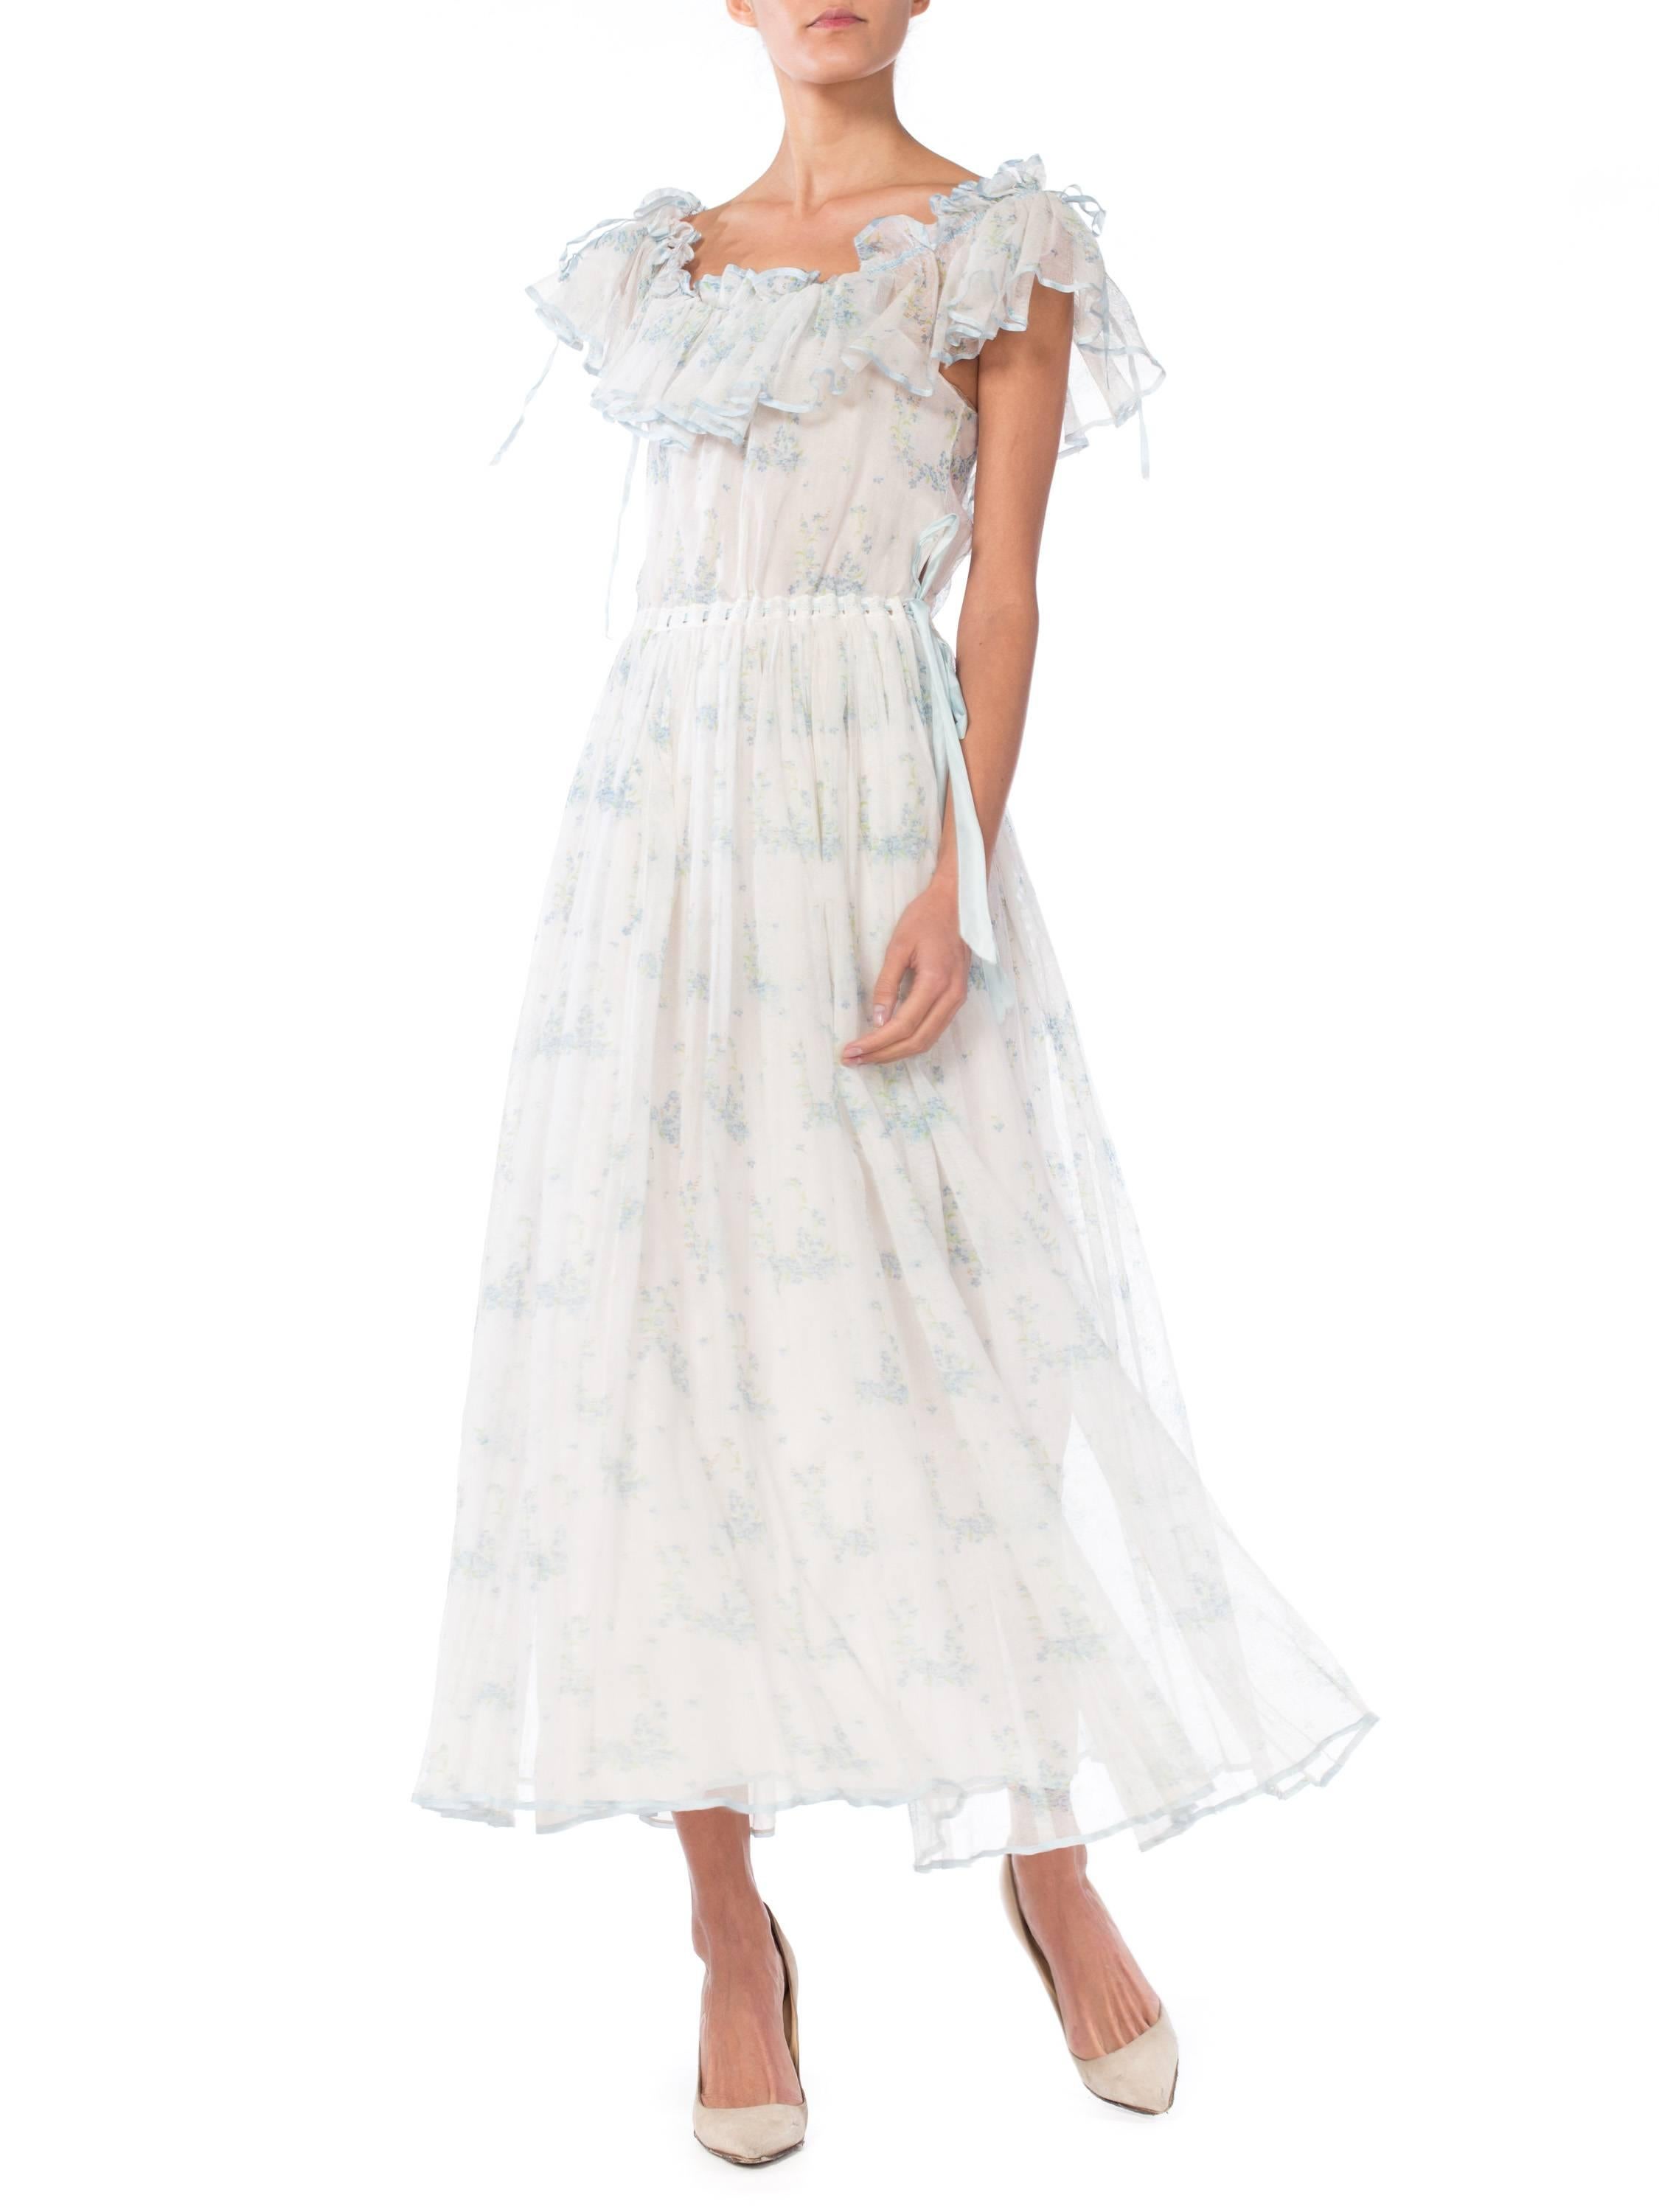 Women's 1970S Pale Blue Floral Printed Cotton Tulle Ruffled Maxi Dress Lined In Silk For Sale